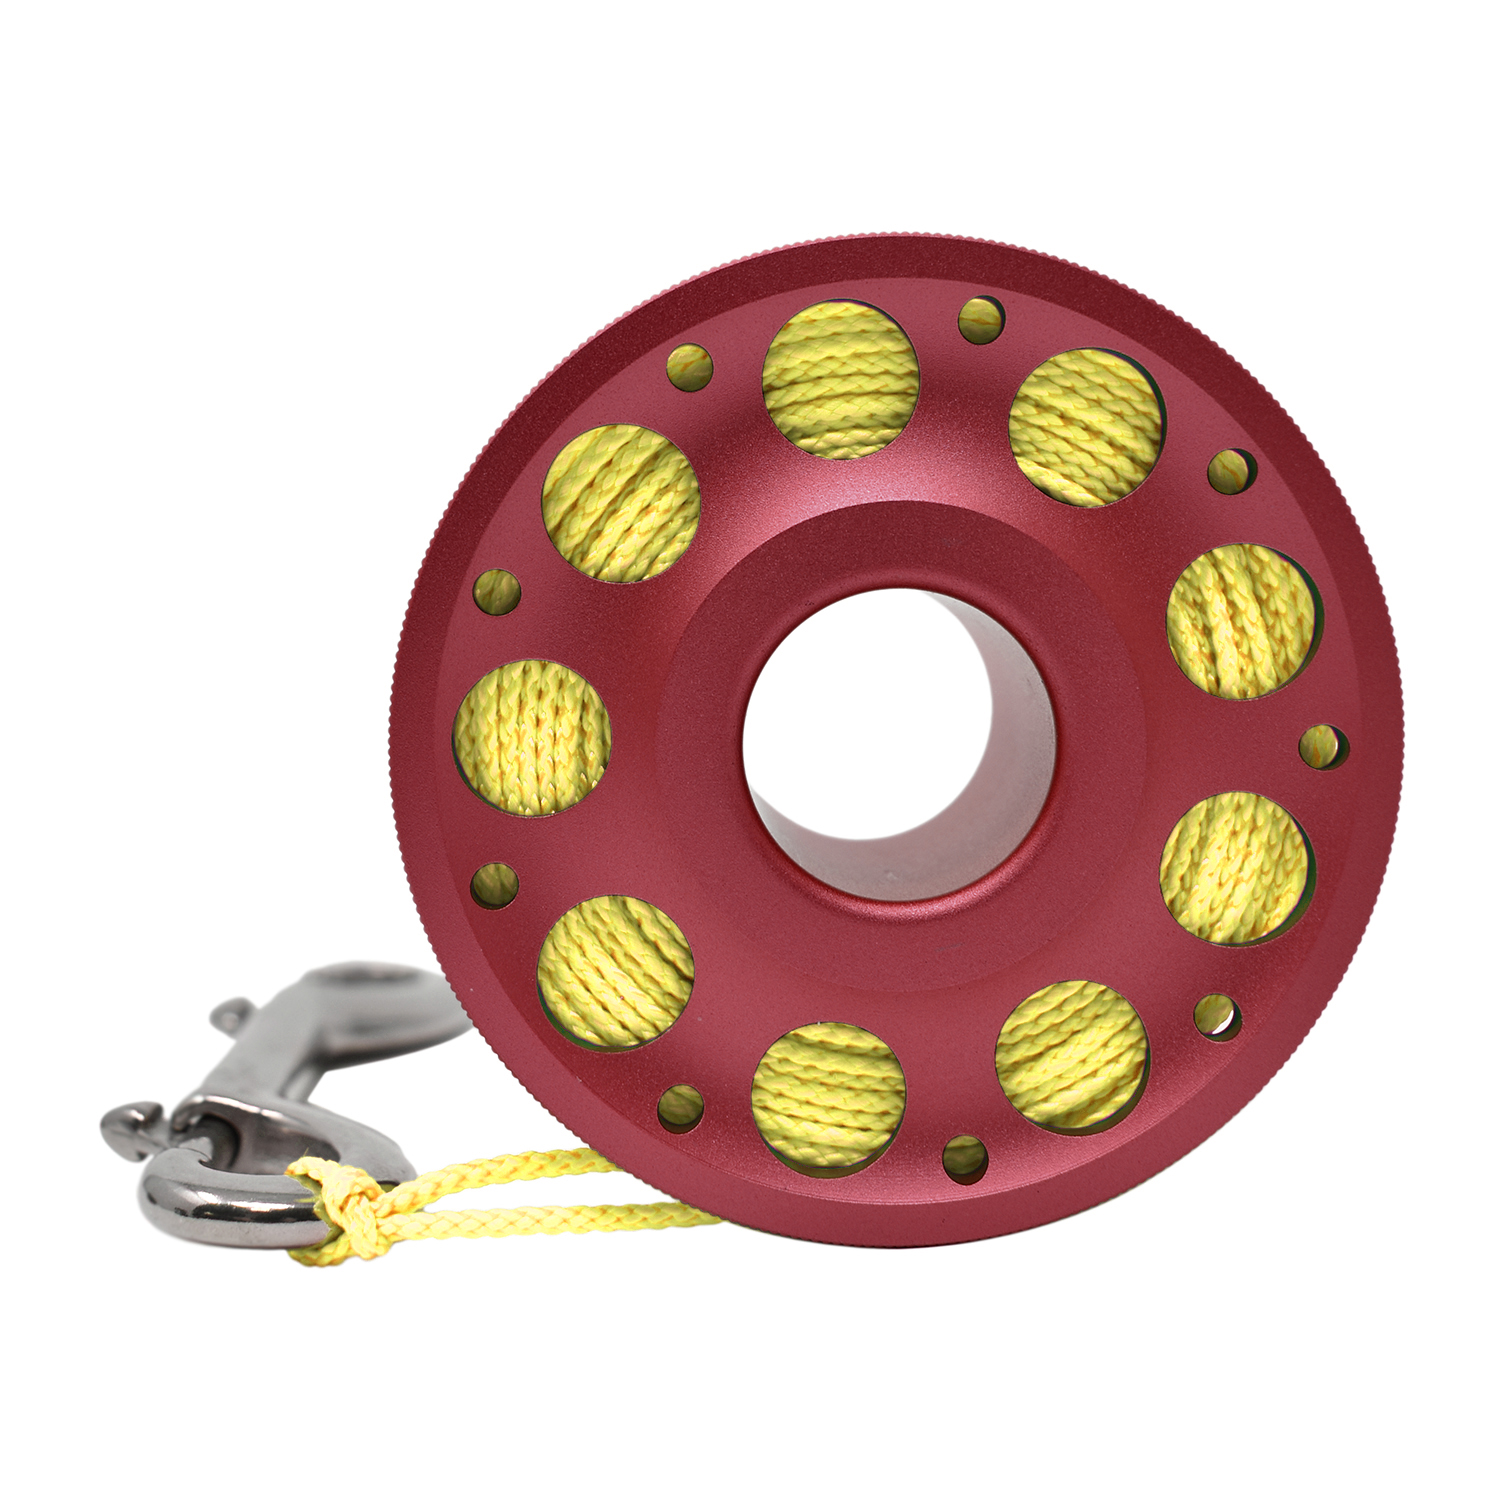 Aluminum Finger Spool 100ft Dive Reel w/ Retractable Holder, Red/Yellow - image 4 of 4